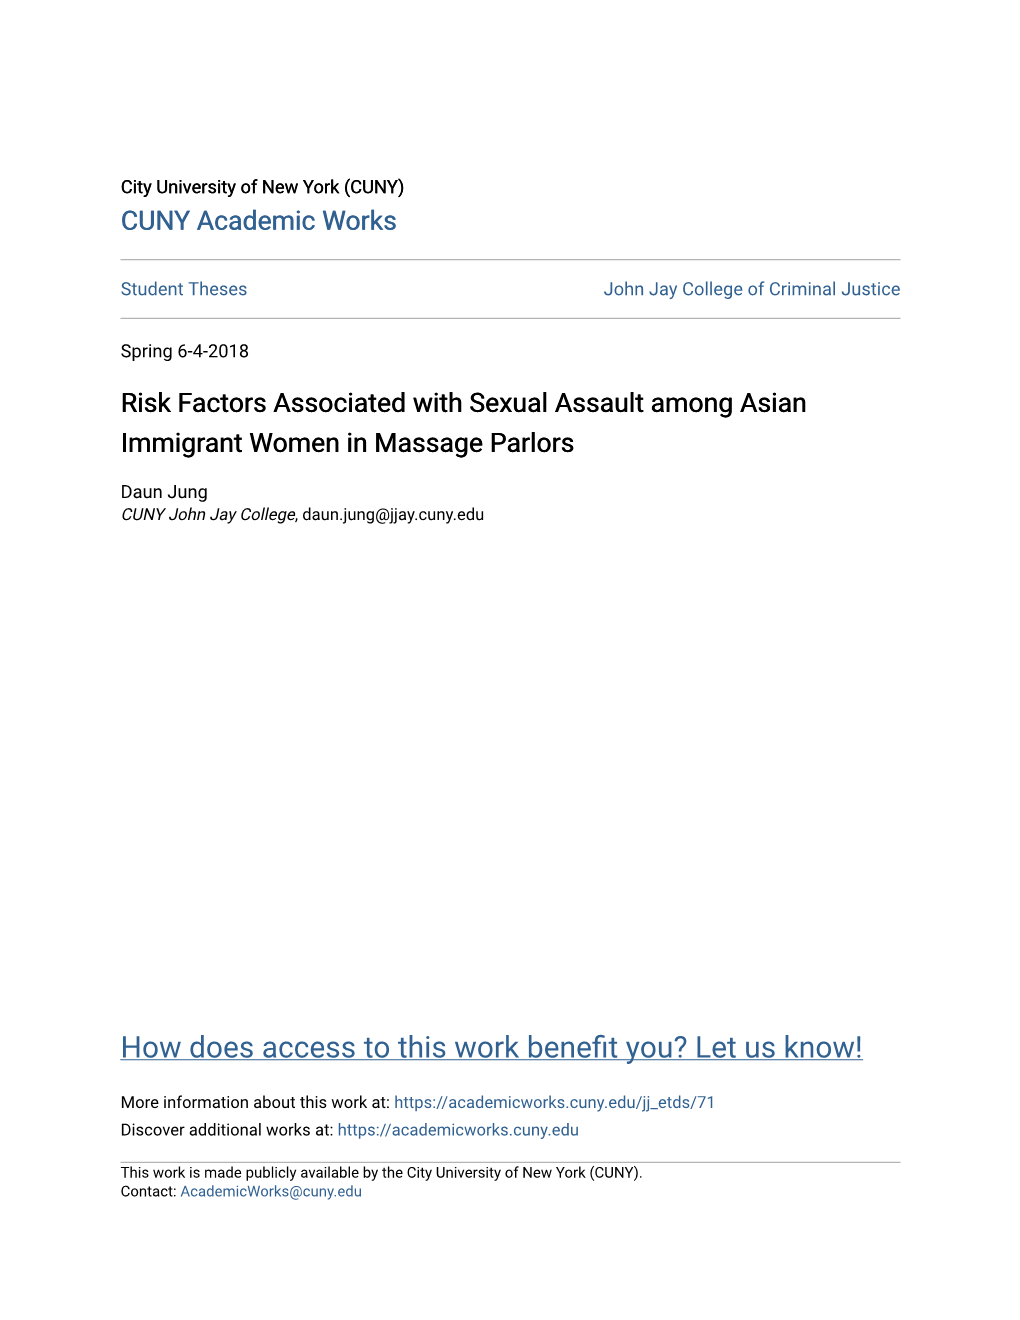 Risk Factors Associated with Sexual Assault Among Asian Immigrant Women in Massage Parlors